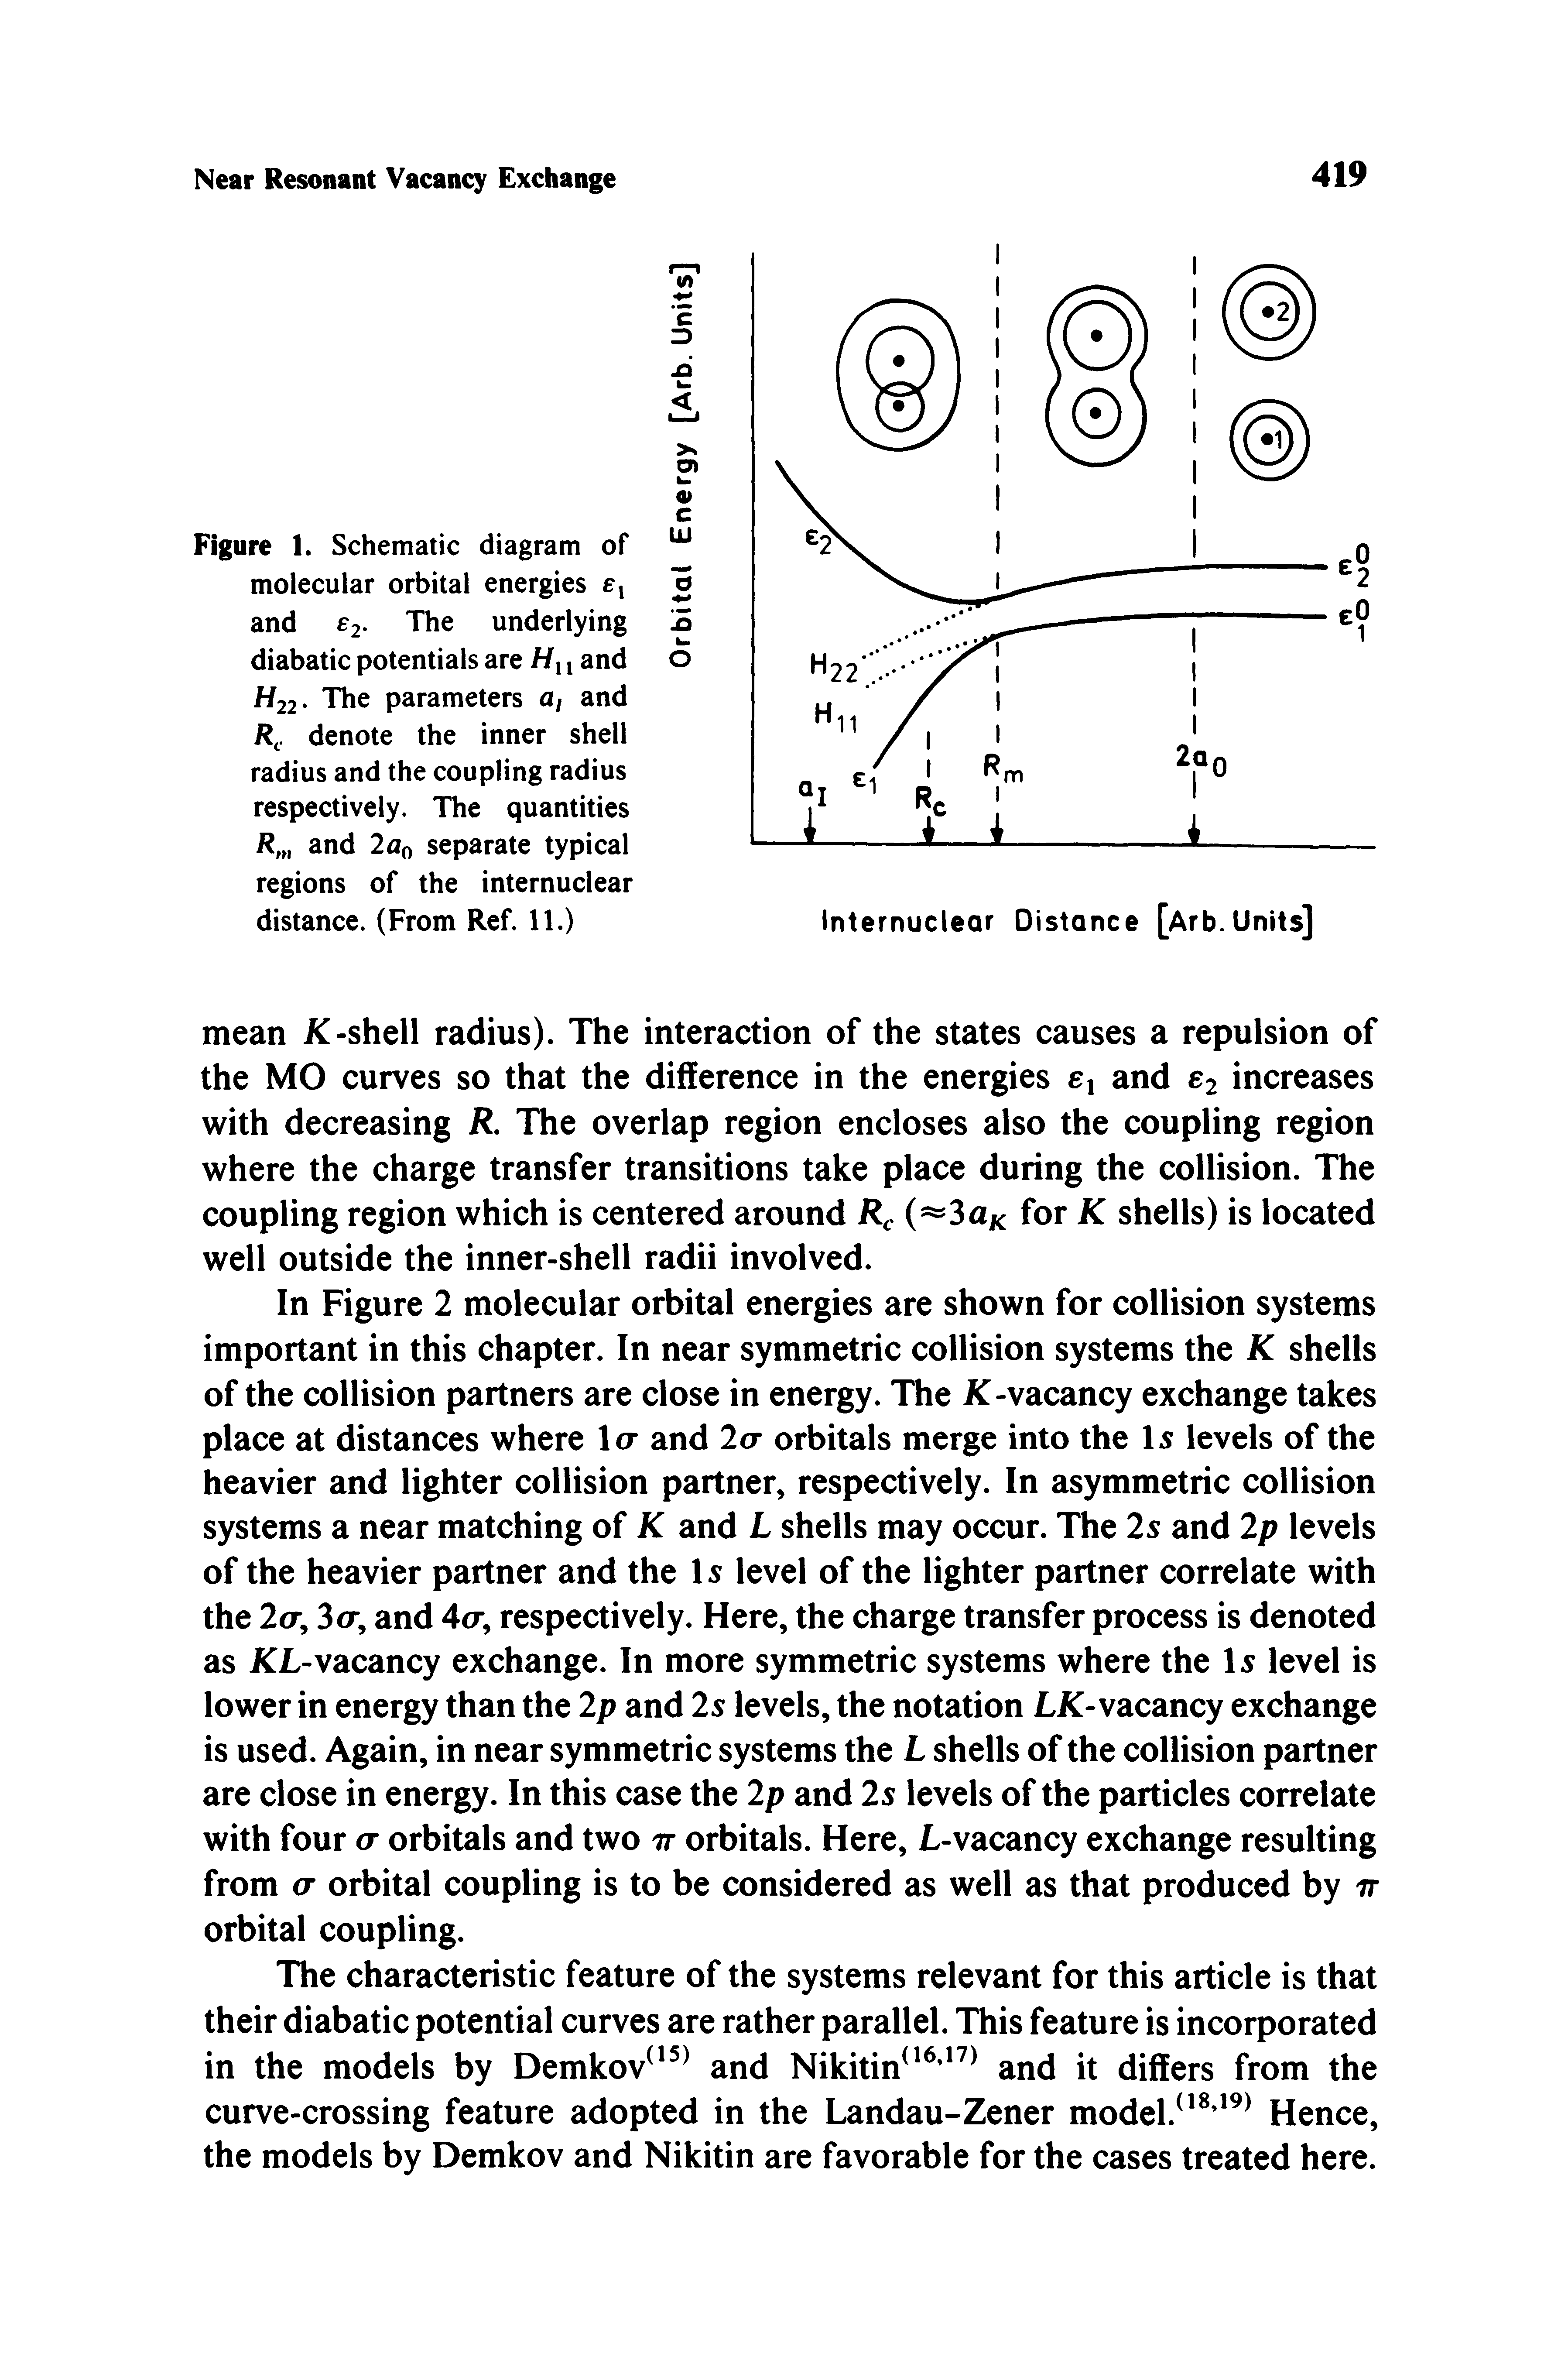 Figure 1. Schematic diagram of molecular orbital energies and 2- The underlying diabatic potentials are //n and H22. The parameters a, and R. denote the inner shell radius and the coupling radius respectively. The quantities R, and separate typical regions of the internuclear distance. (From Ref. 11.)...